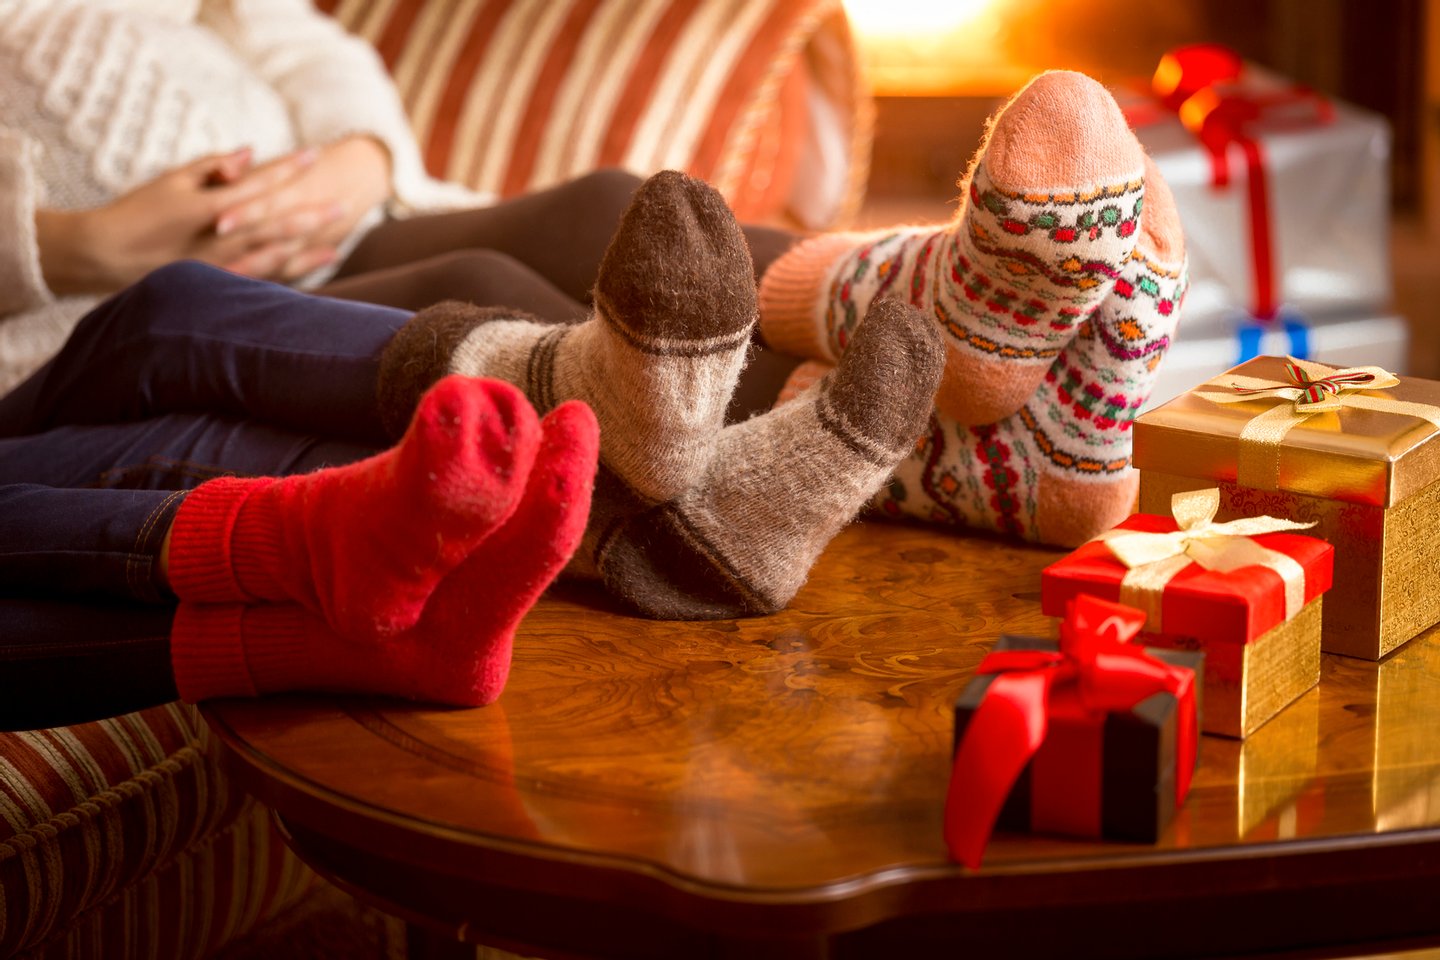 Women, Comfortable, Sock, Log, Fireplace, Child, Sitting, Burning, Christmas Stocking, Heat - Temperature, Togetherness, Relaxation, Wool, Parent, Family, Night, Winter, Fire - Natural Phenomenon, Gift, Christmas, Box - Container, Foot, 